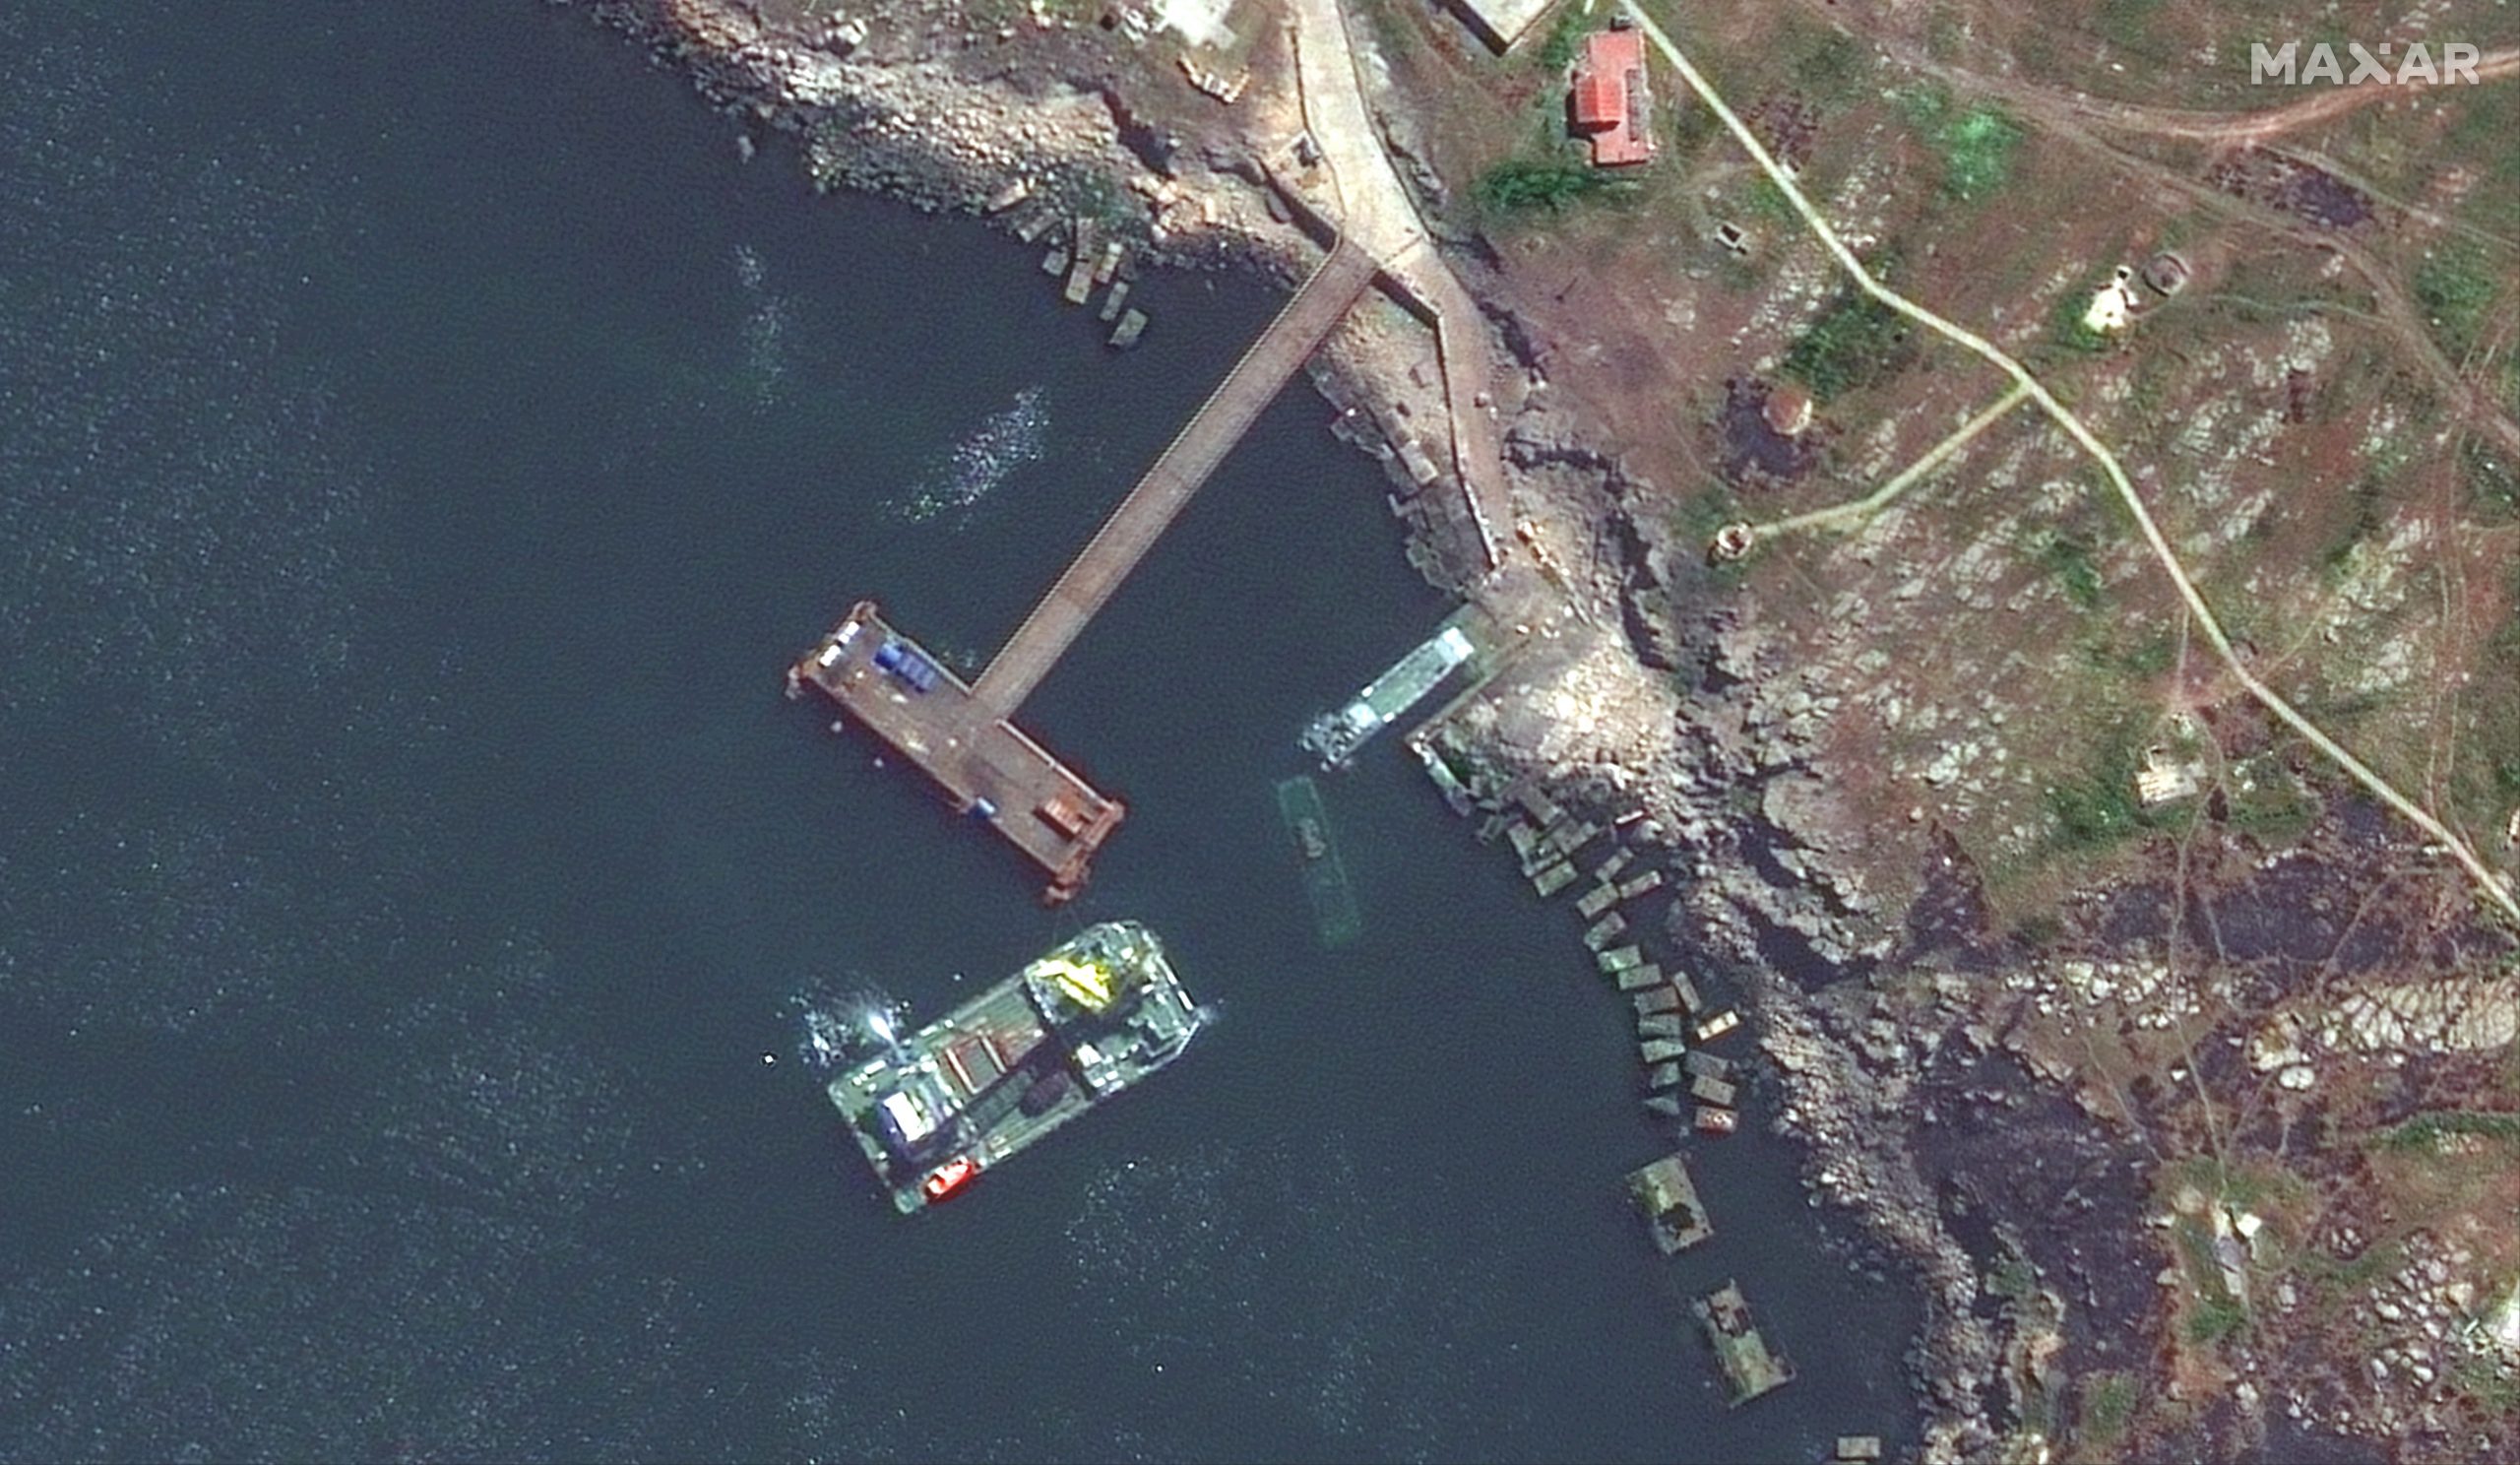 This image shows a closer view of a barge, a landing craft, and a sunken ship off Snake Island.